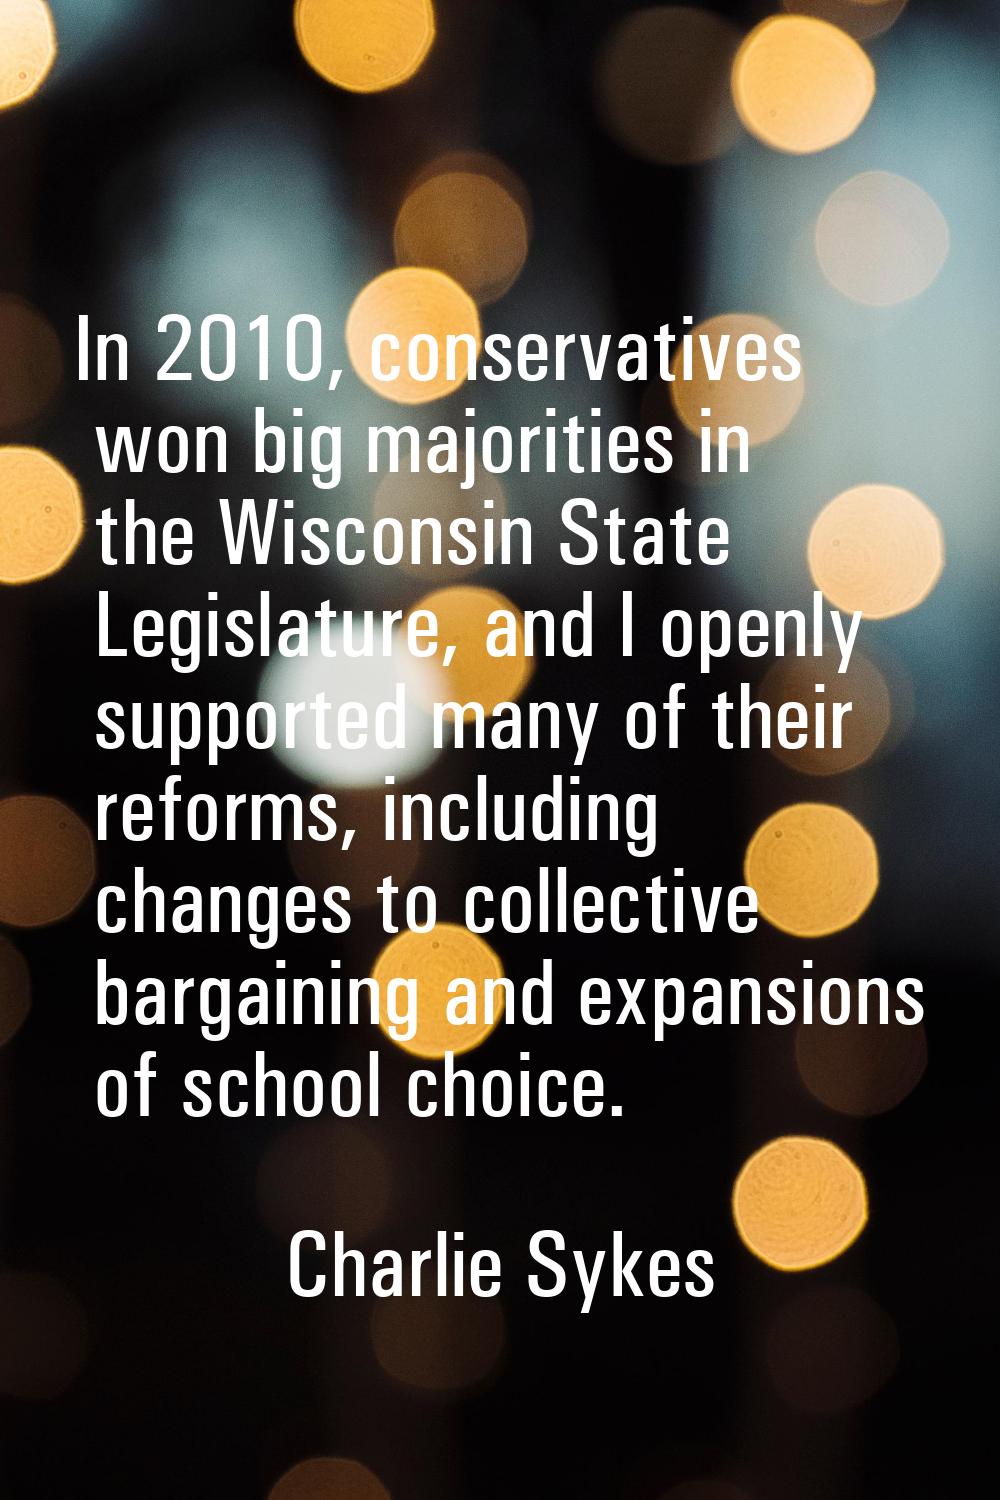 In 2010, conservatives won big majorities in the Wisconsin State Legislature, and I openly supporte